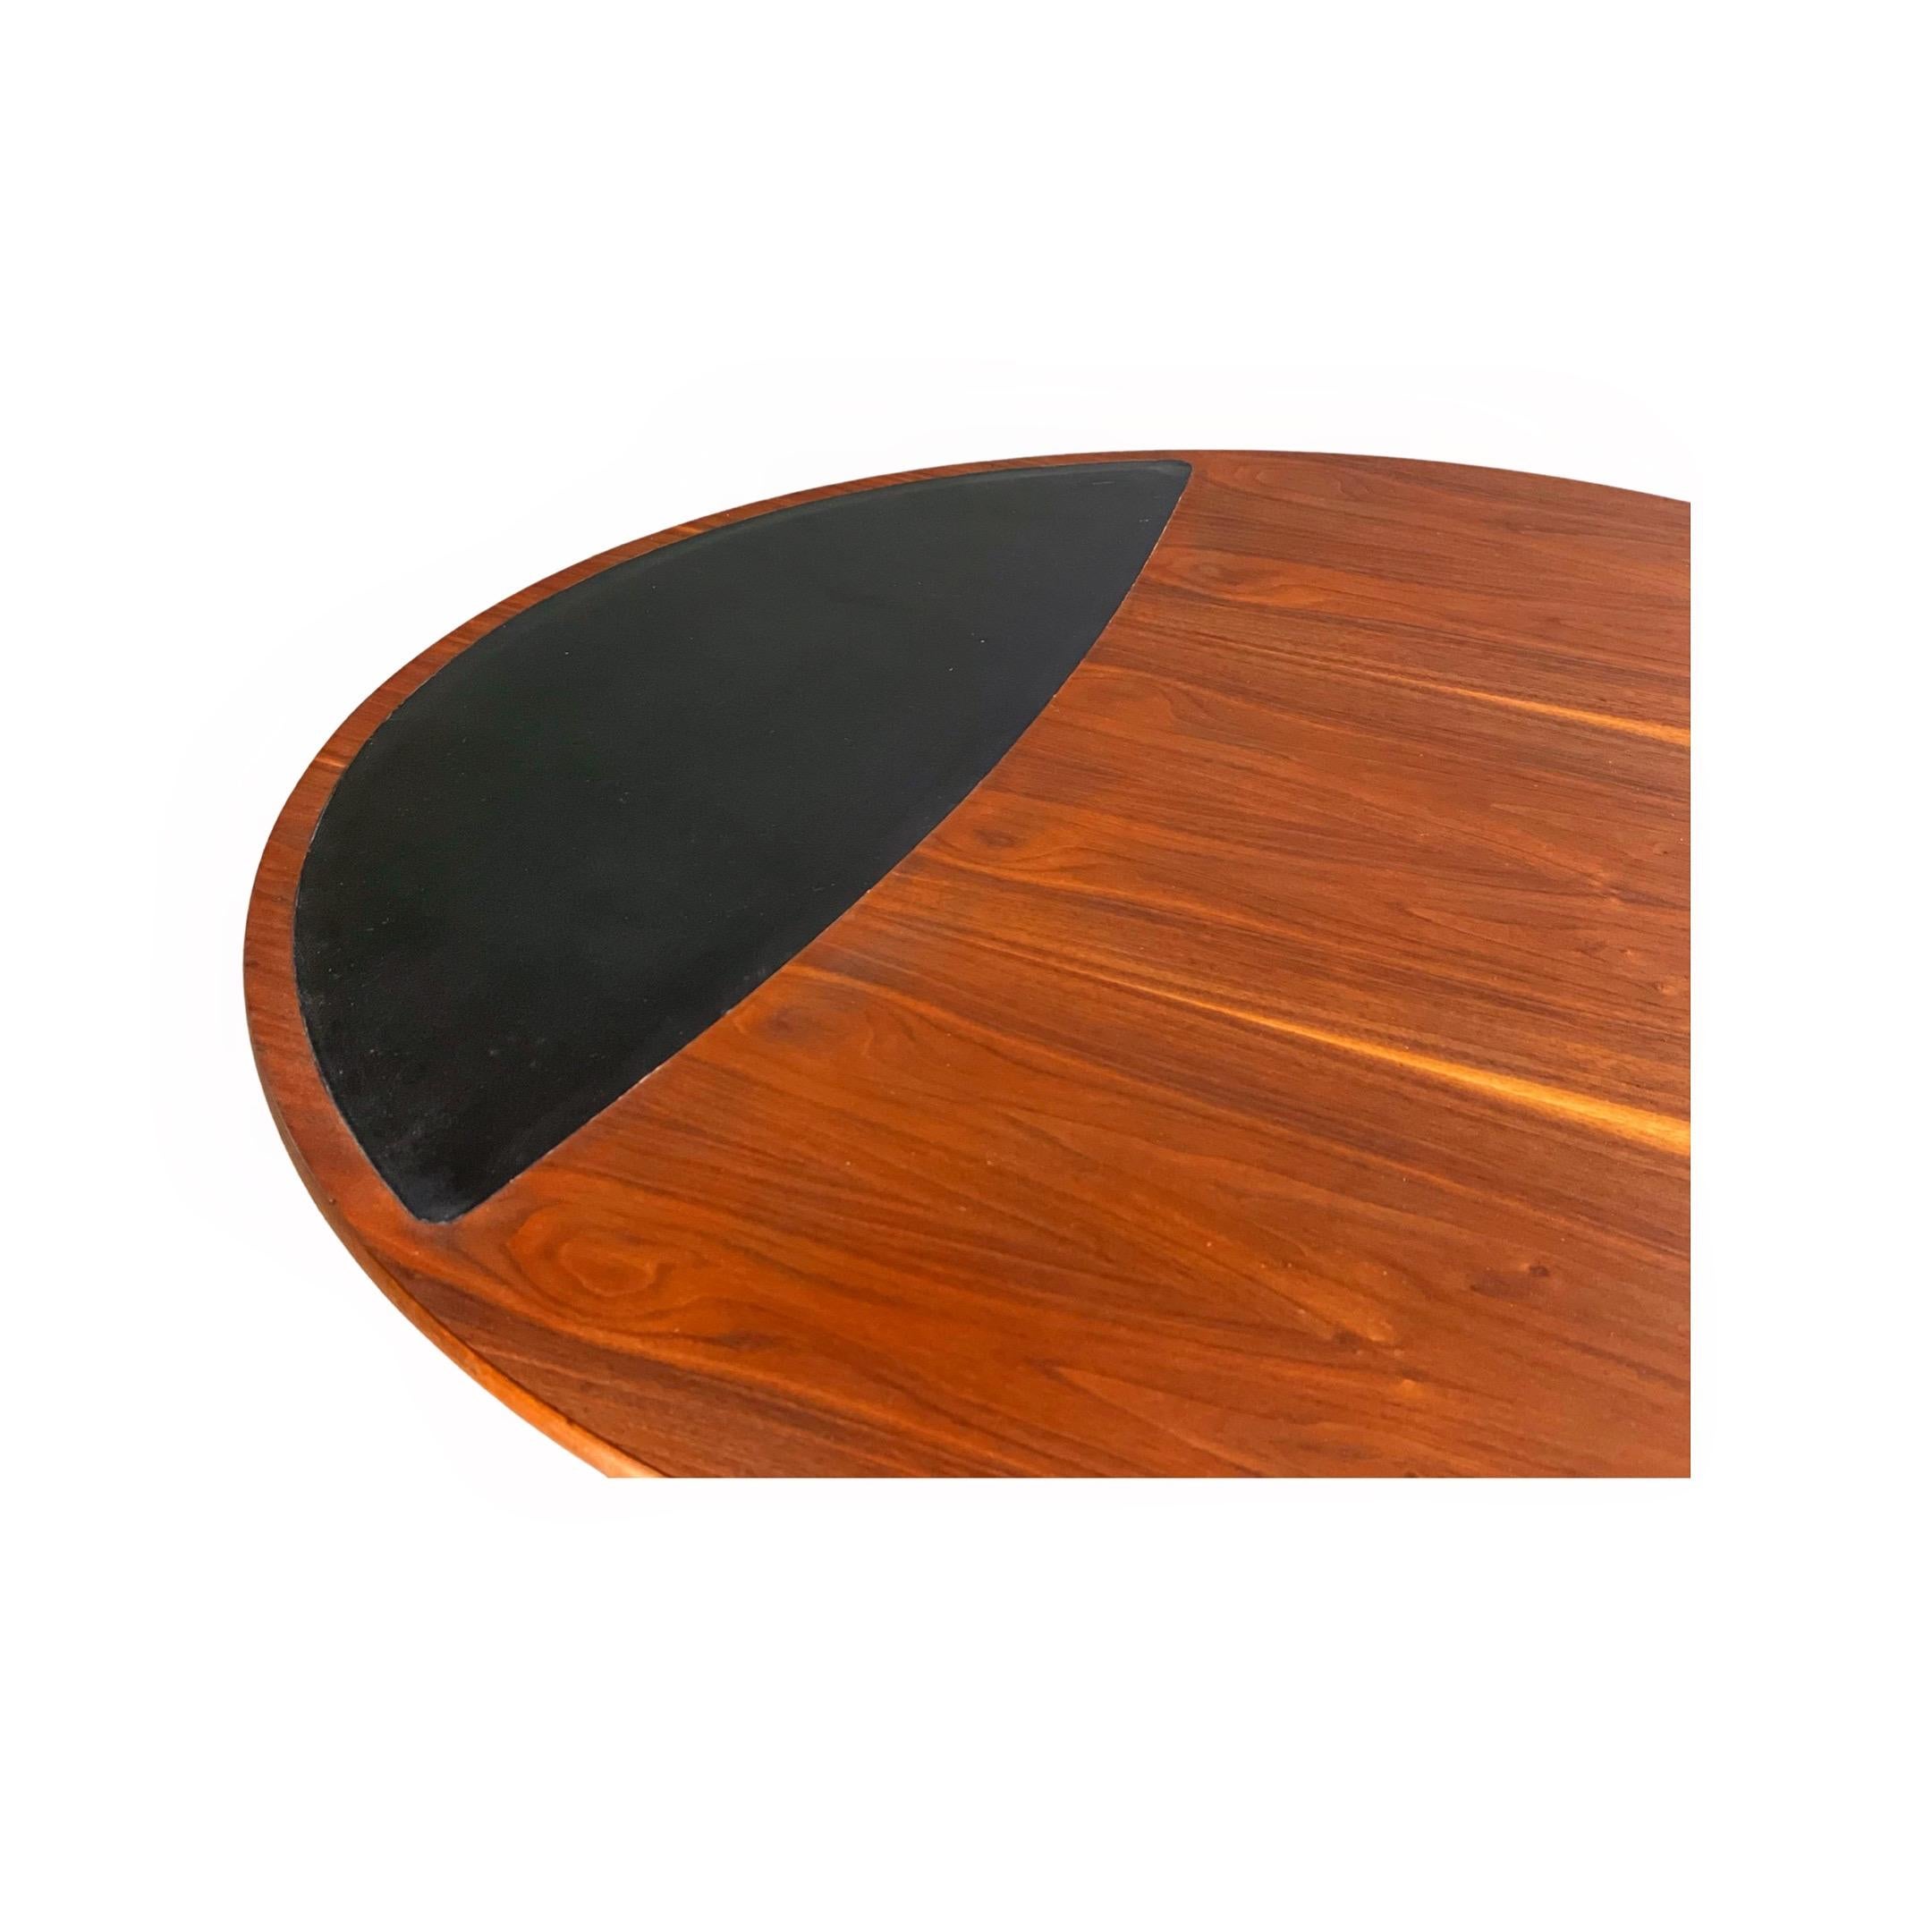 Midcentury Coffee Table in Walnut and Leather by Barney Flagg, Drexel Parallel In Good Condition For Sale In Framingham, MA